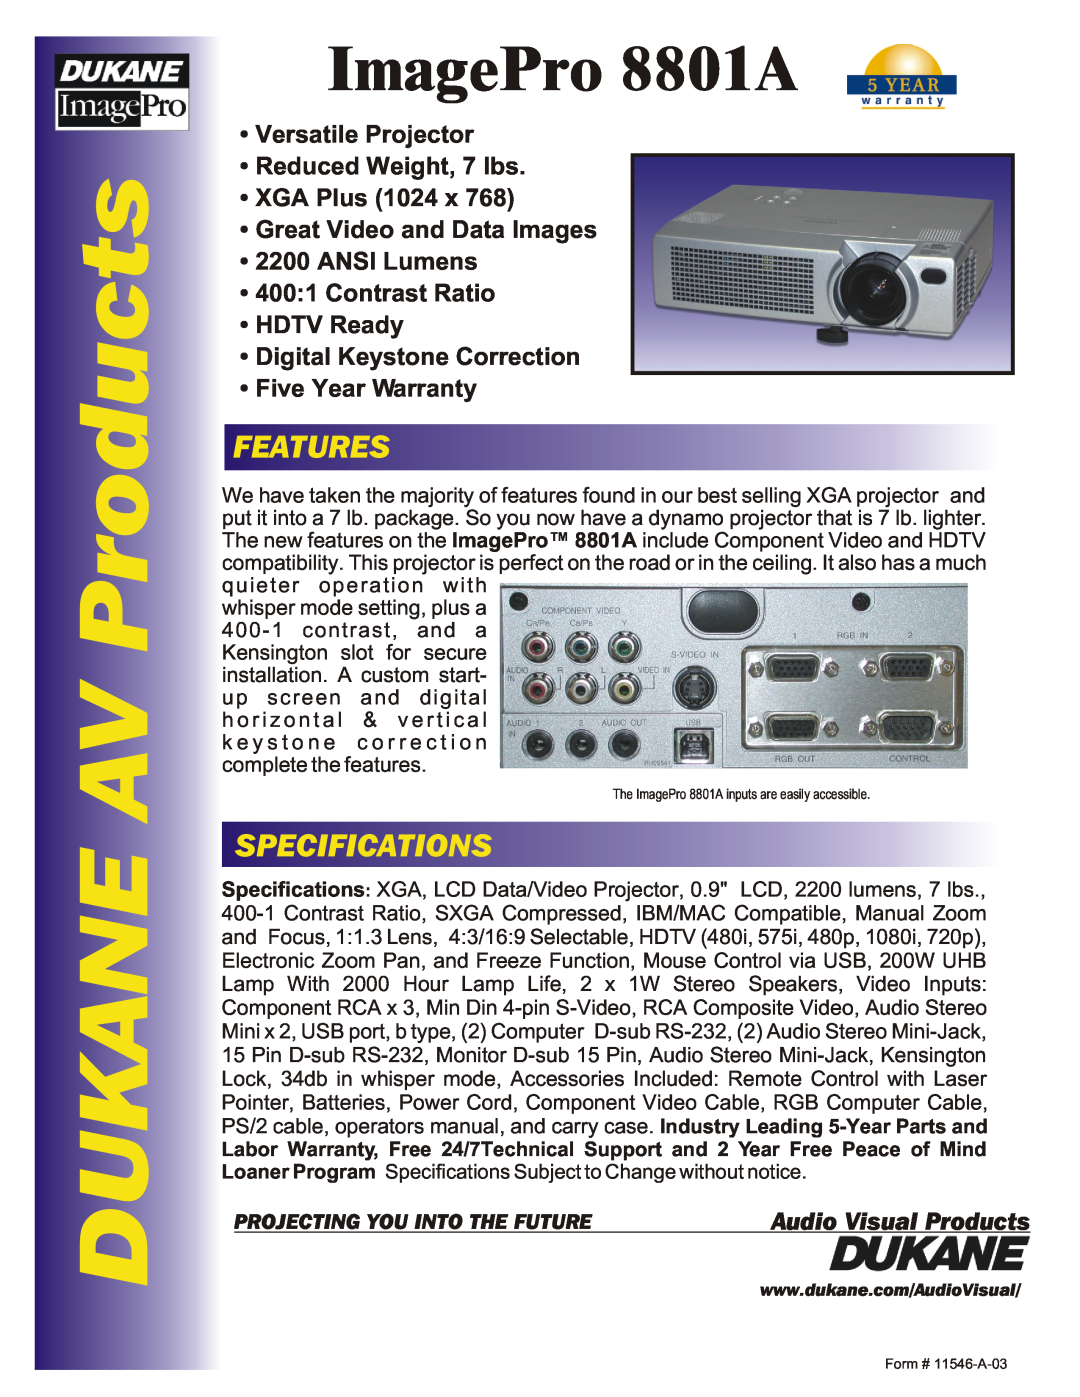 Dukane specifications DUKANE AV Products, ImagePro 8801A, Features, Specifications, Audio Visual Products 